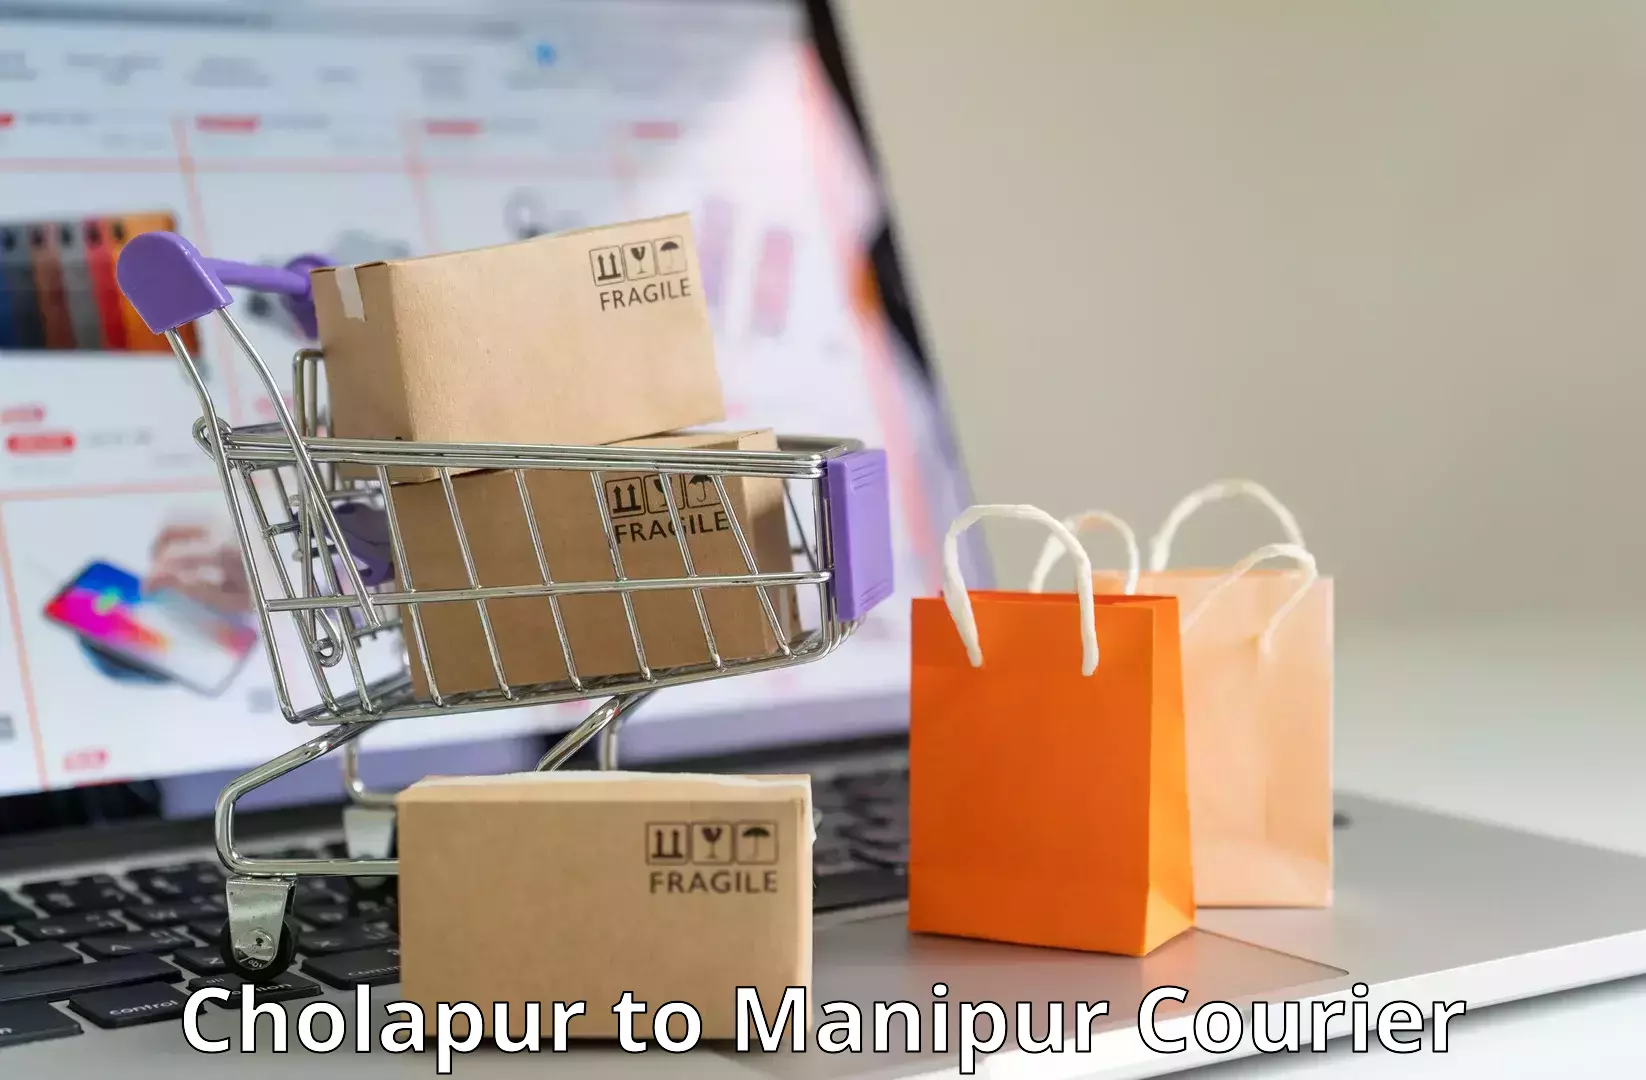 Quality courier partnerships in Cholapur to Chandel